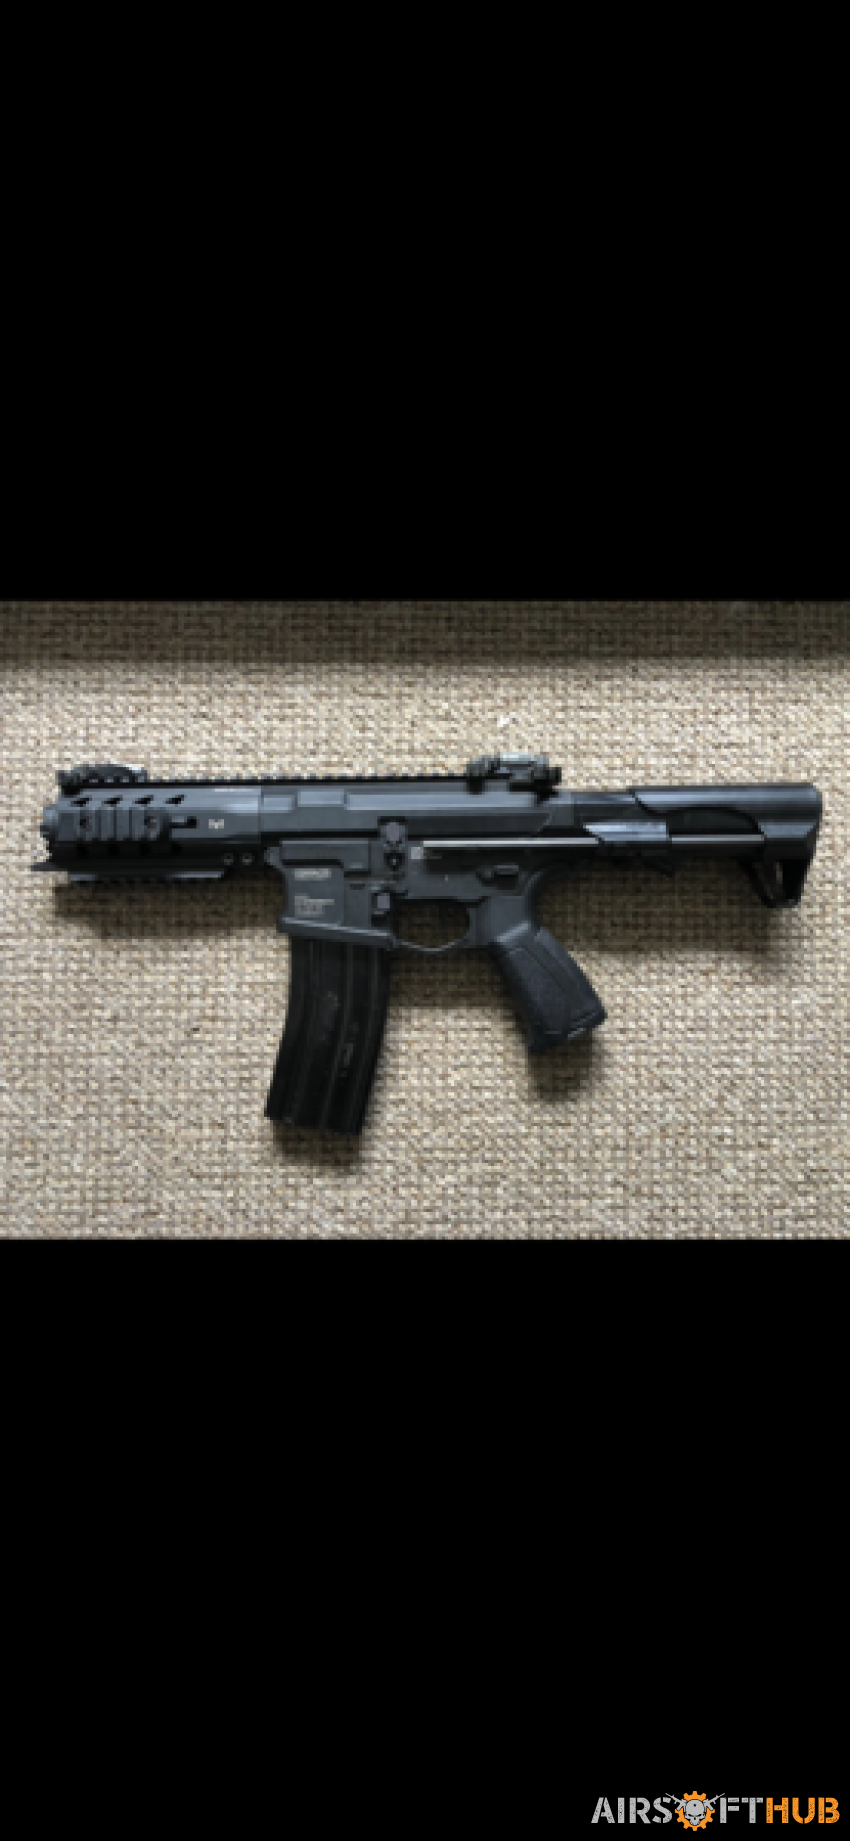 G&g ato 556 used - Used airsoft equipment